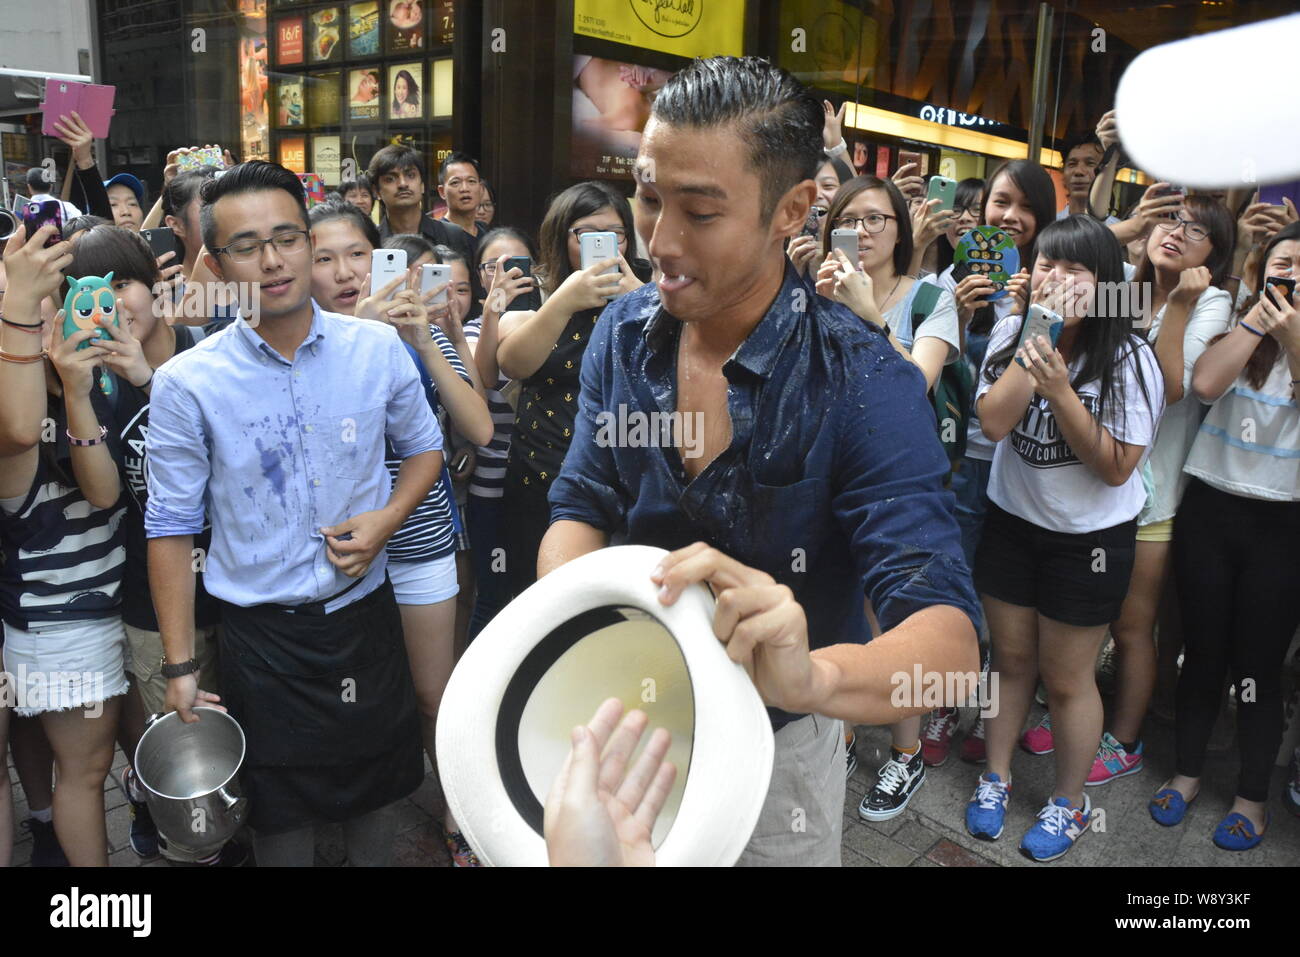 Choi Siwon of South Korean pop group Super Junior, front, reacts after braving the Ice Bucket Challenge in Central, Hong Kong, China, 18 August 2014. Stock Photo